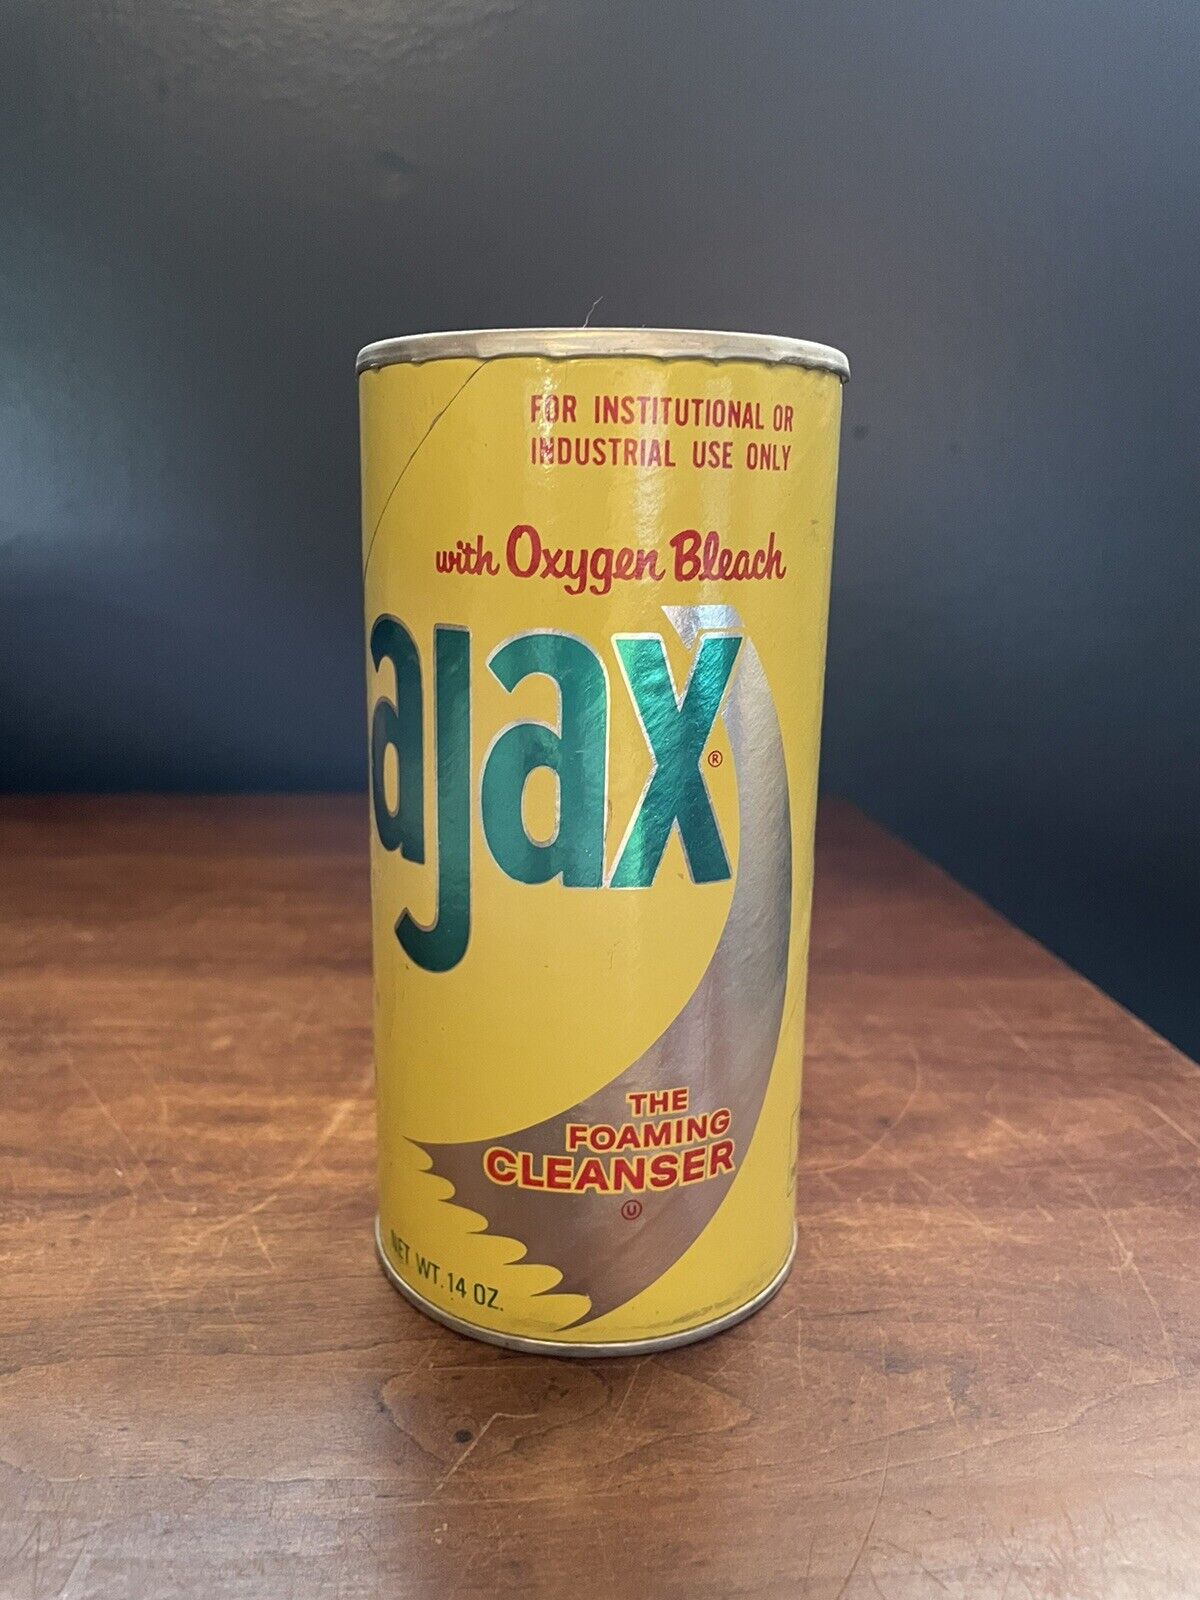 NEW Vintage 14 oz Ajax with Oxygen Bleach Foaming Cleanser